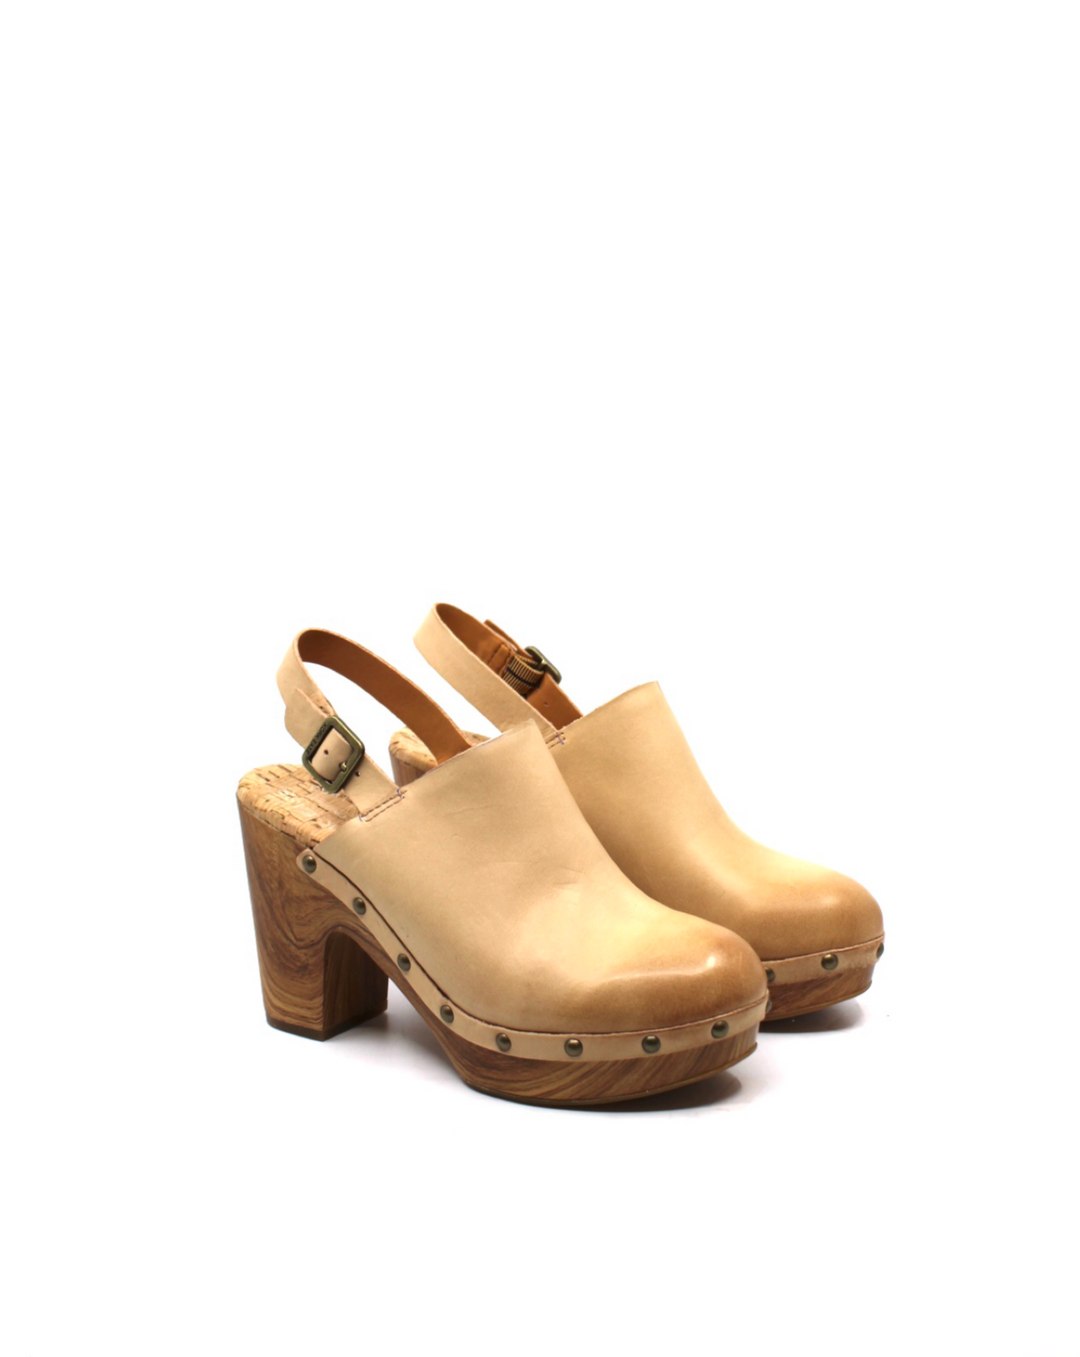 Kork-Ease Darby Natural - Dear Lucy